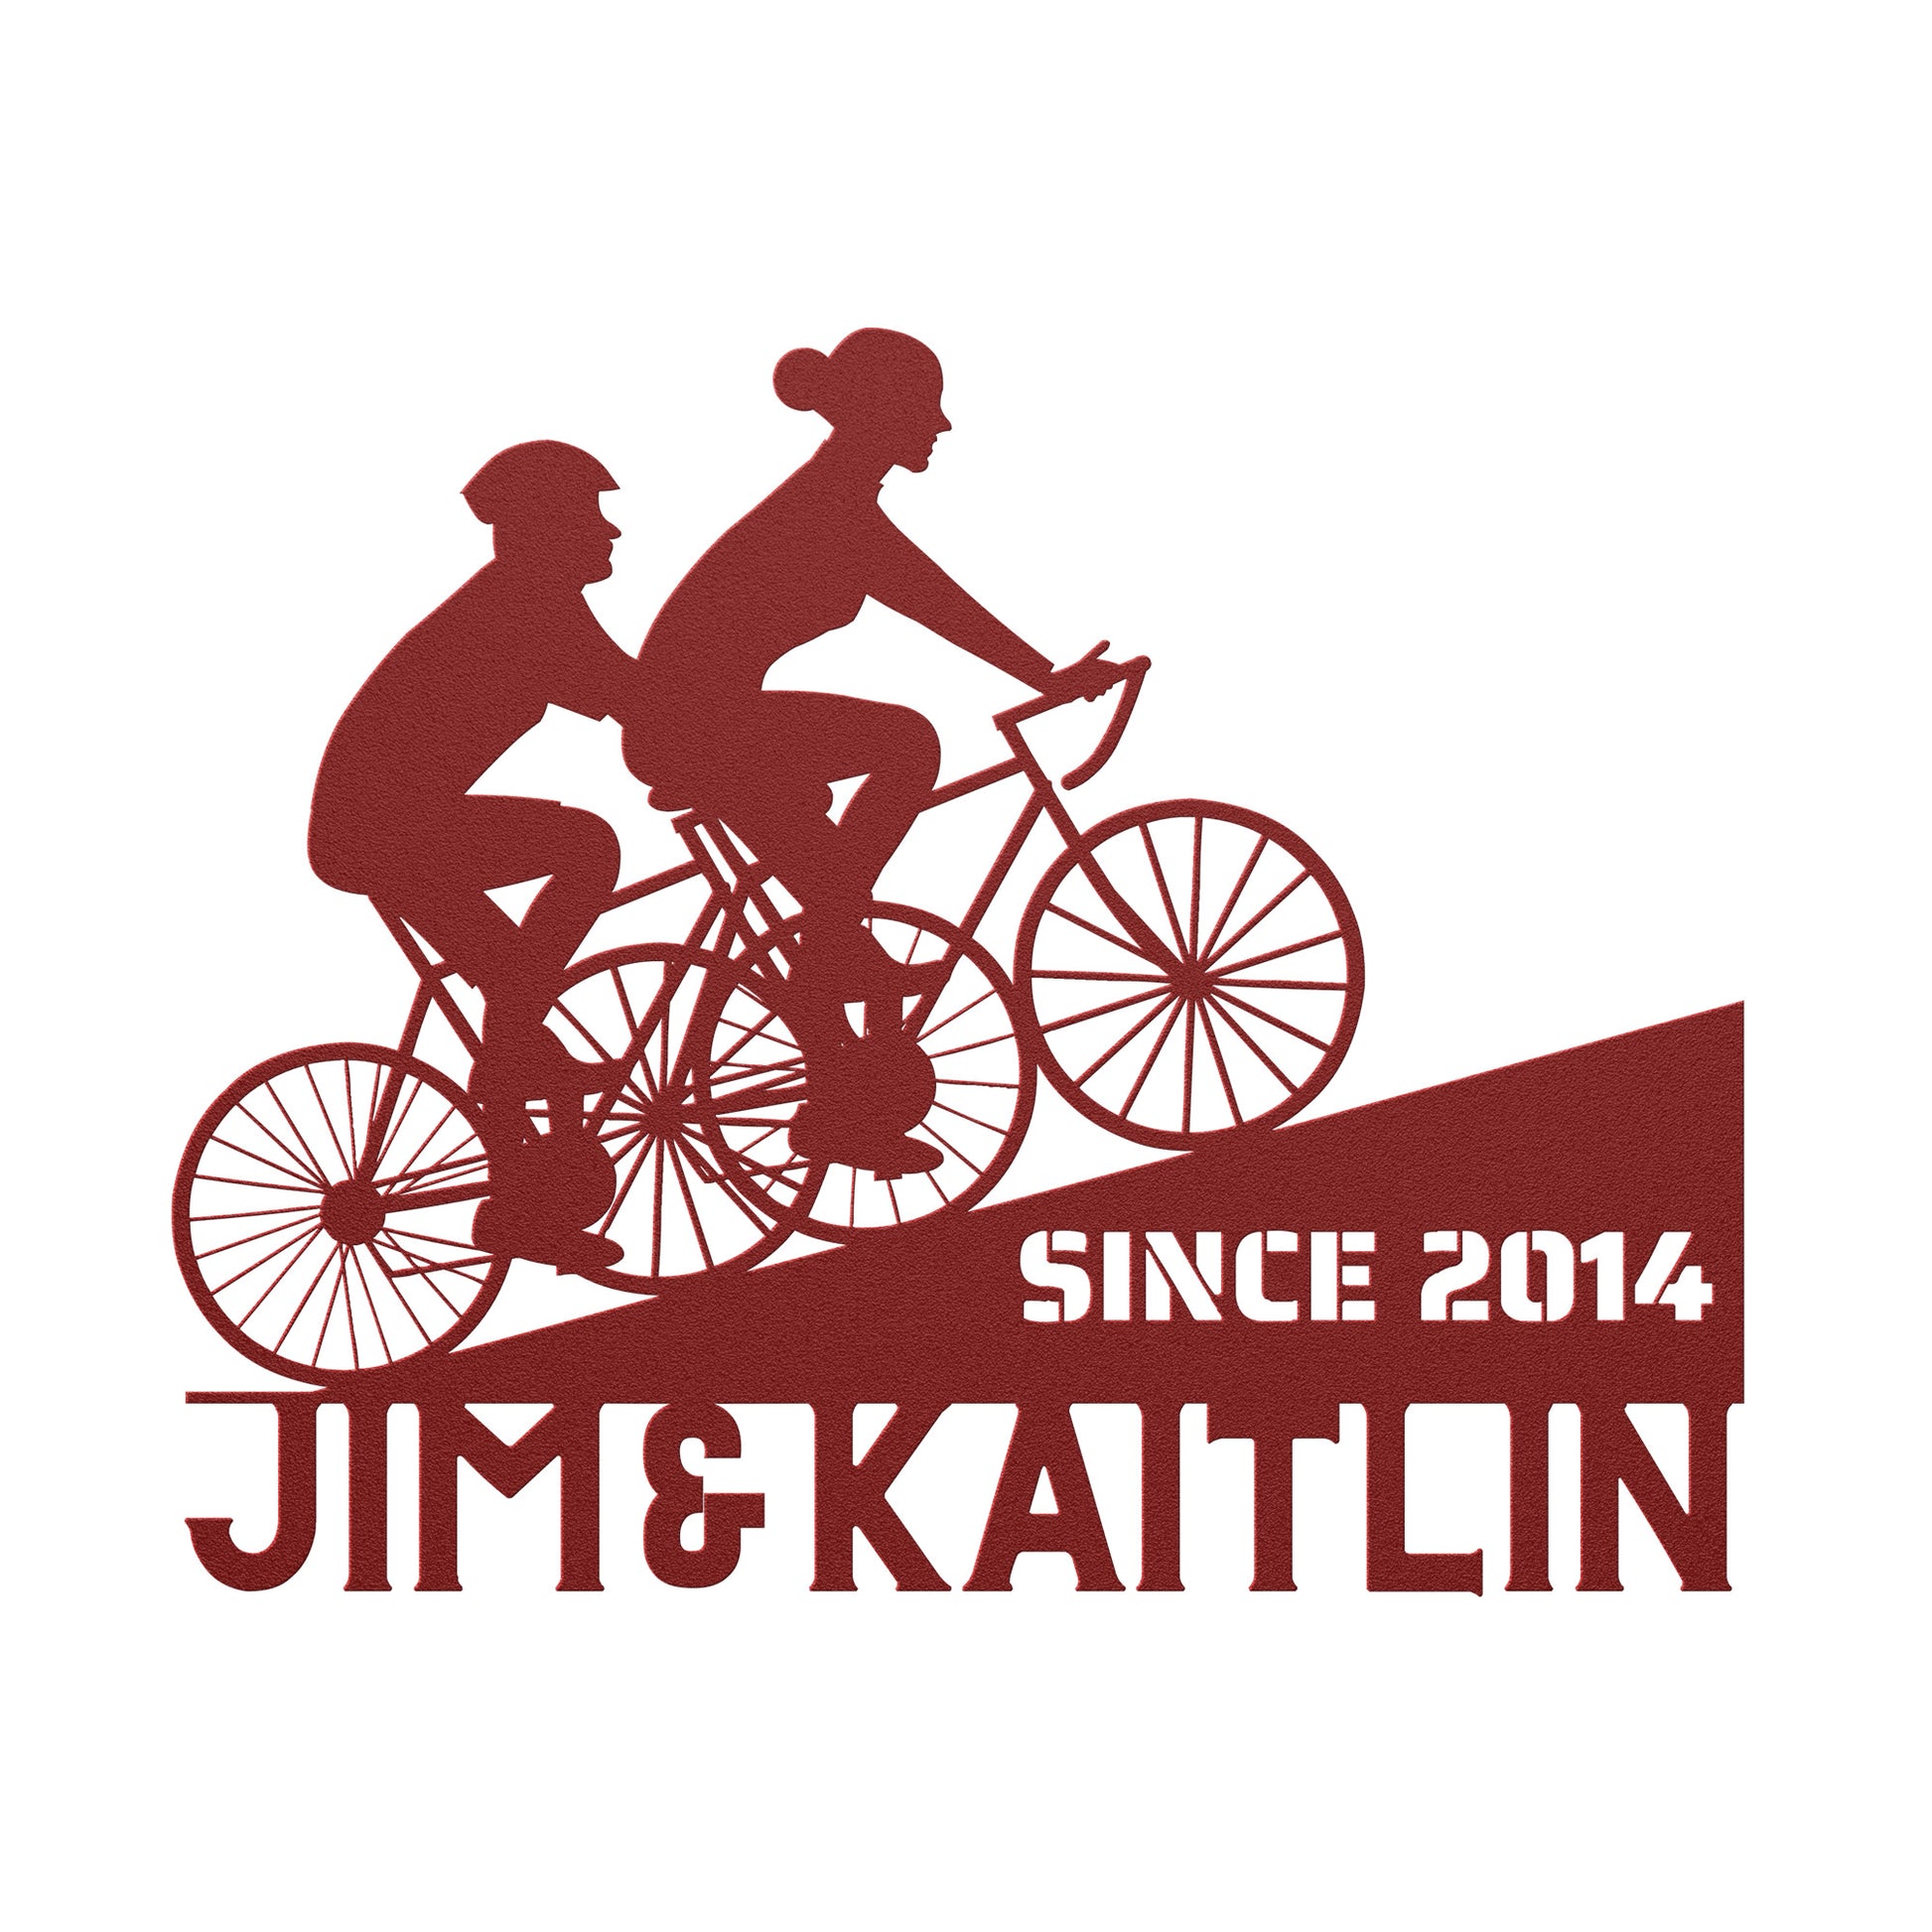 A Personalized Couple Cycling Uphill Metal Wall Art Sign made from 18 gauge steel for Jim and Katie by teelaunch.